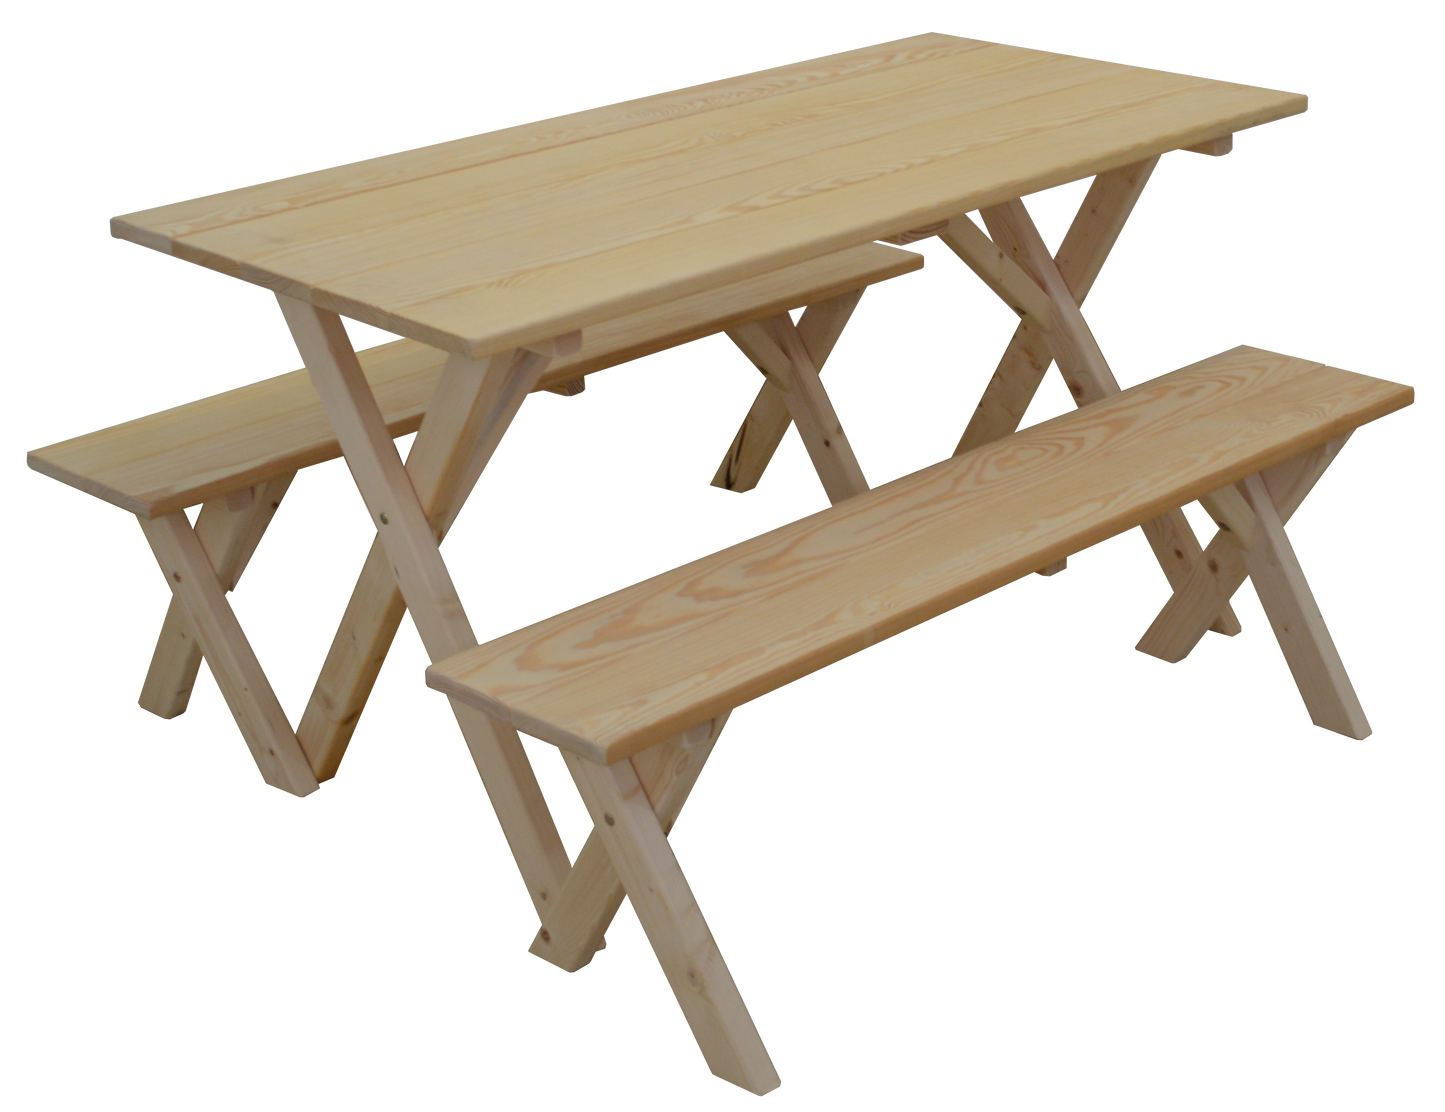 A&L Furniture Co. Yellow Pine 5' Economy Table with 2 benches - LEAD TIME TO SHIP 10 BUSINESS DAYS